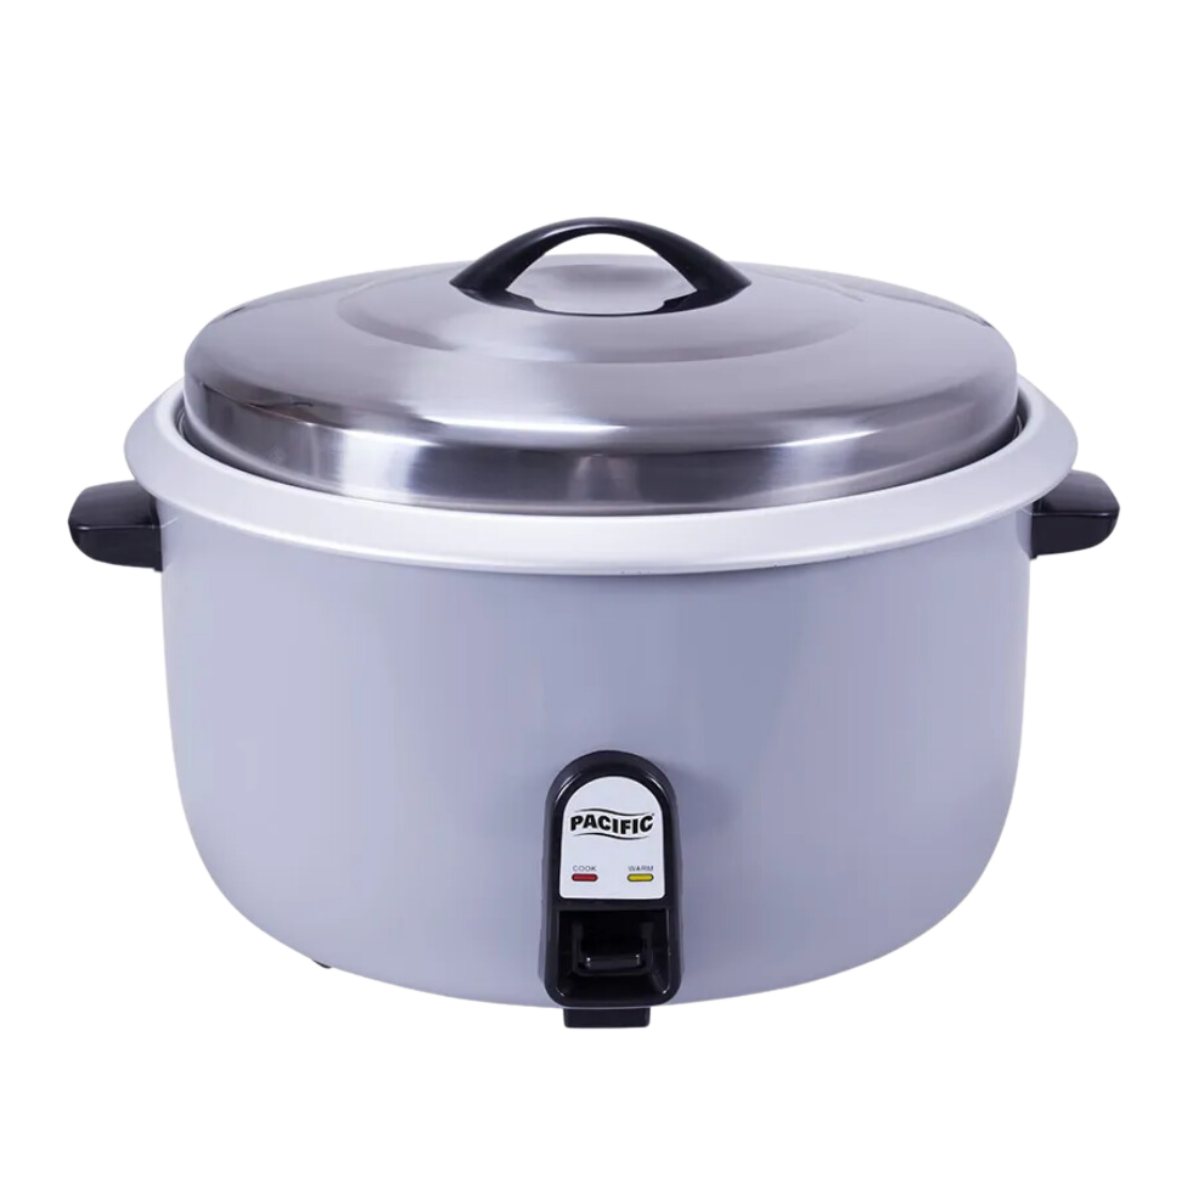 PACIFIC RC120 12LTS RICE COOKER